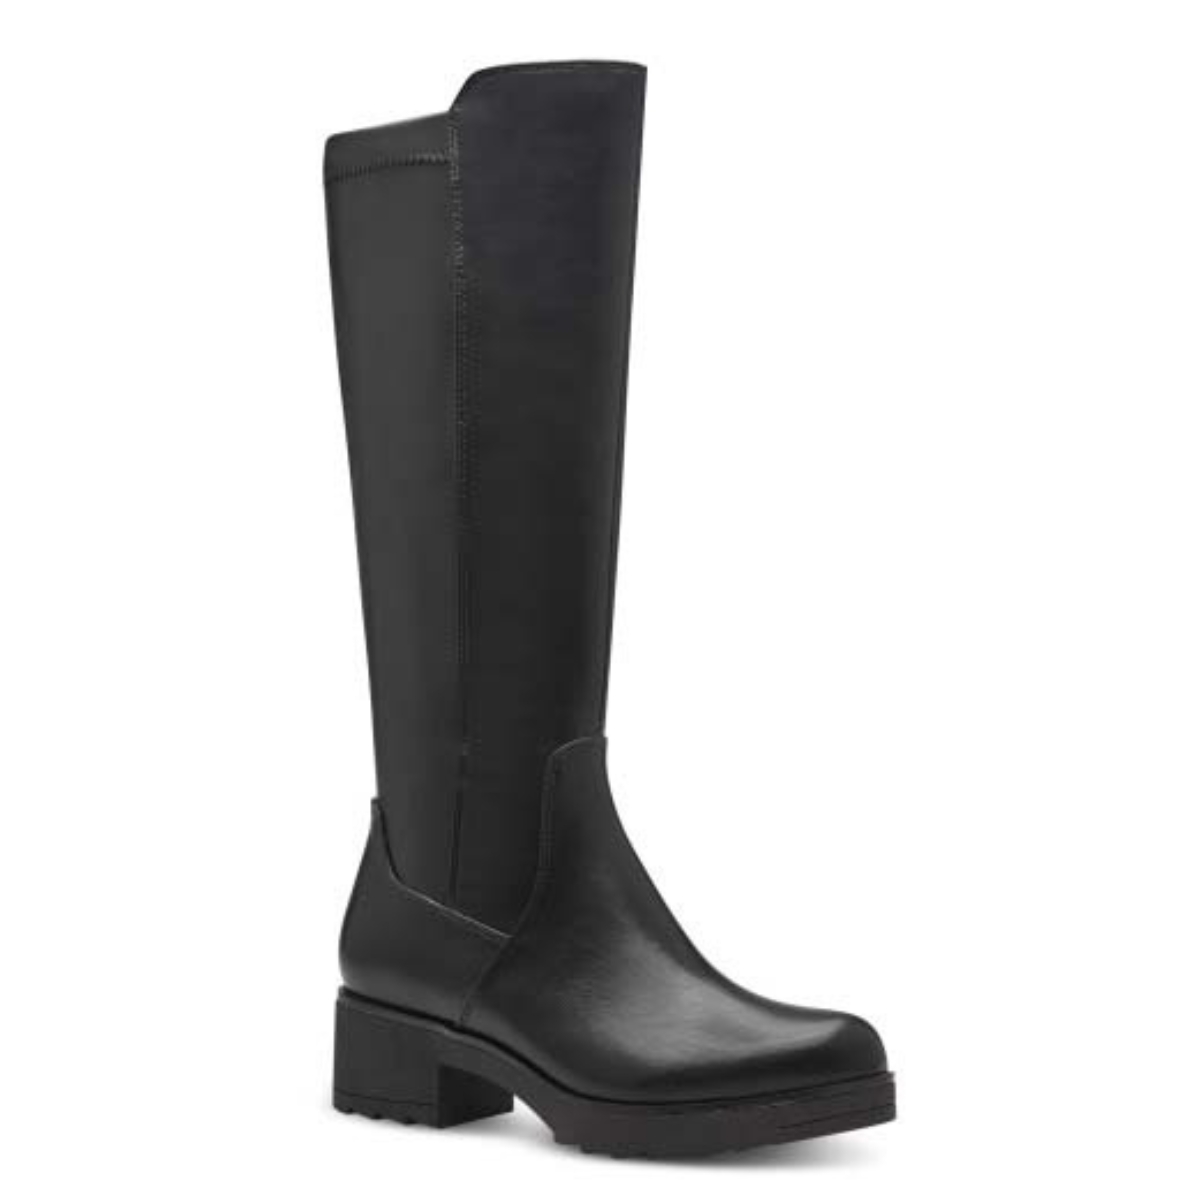 Marco Tozzi Dono Long Black Womens Knee-High Boots 25606-41-001 In Size 38 In Plain Black